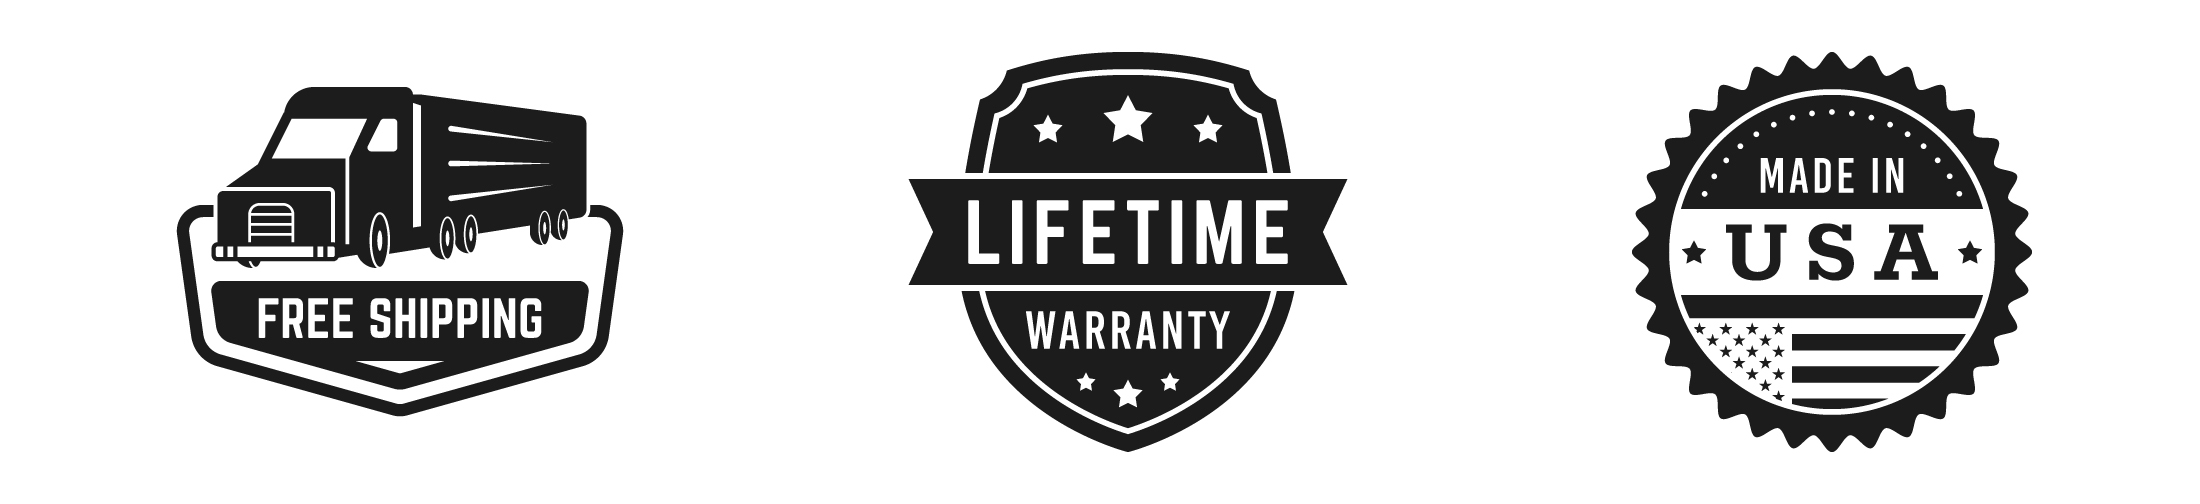 free shipping - lifetime warranty - made in usa